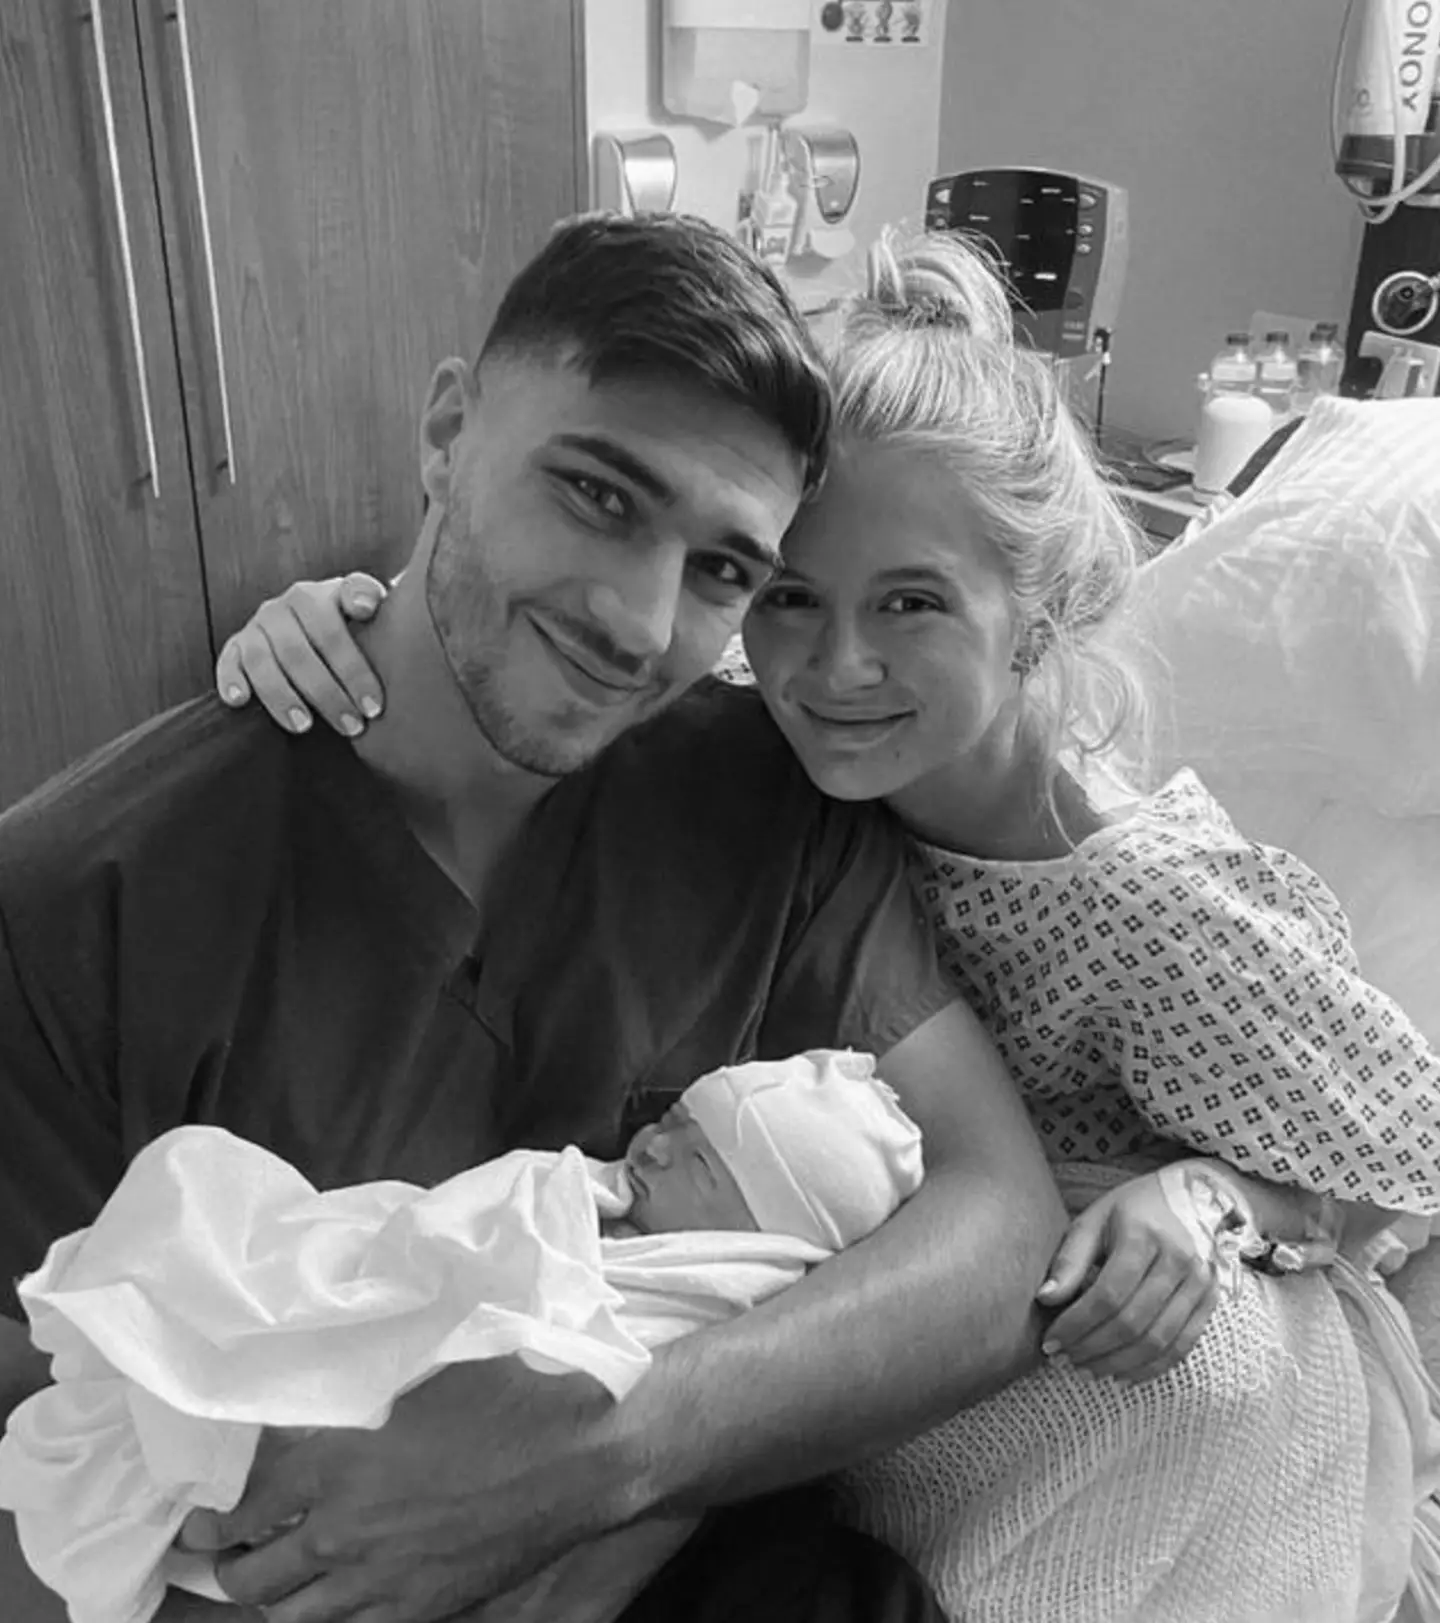 Molly-Mae and Tommy welcomed their first child earlier this year.